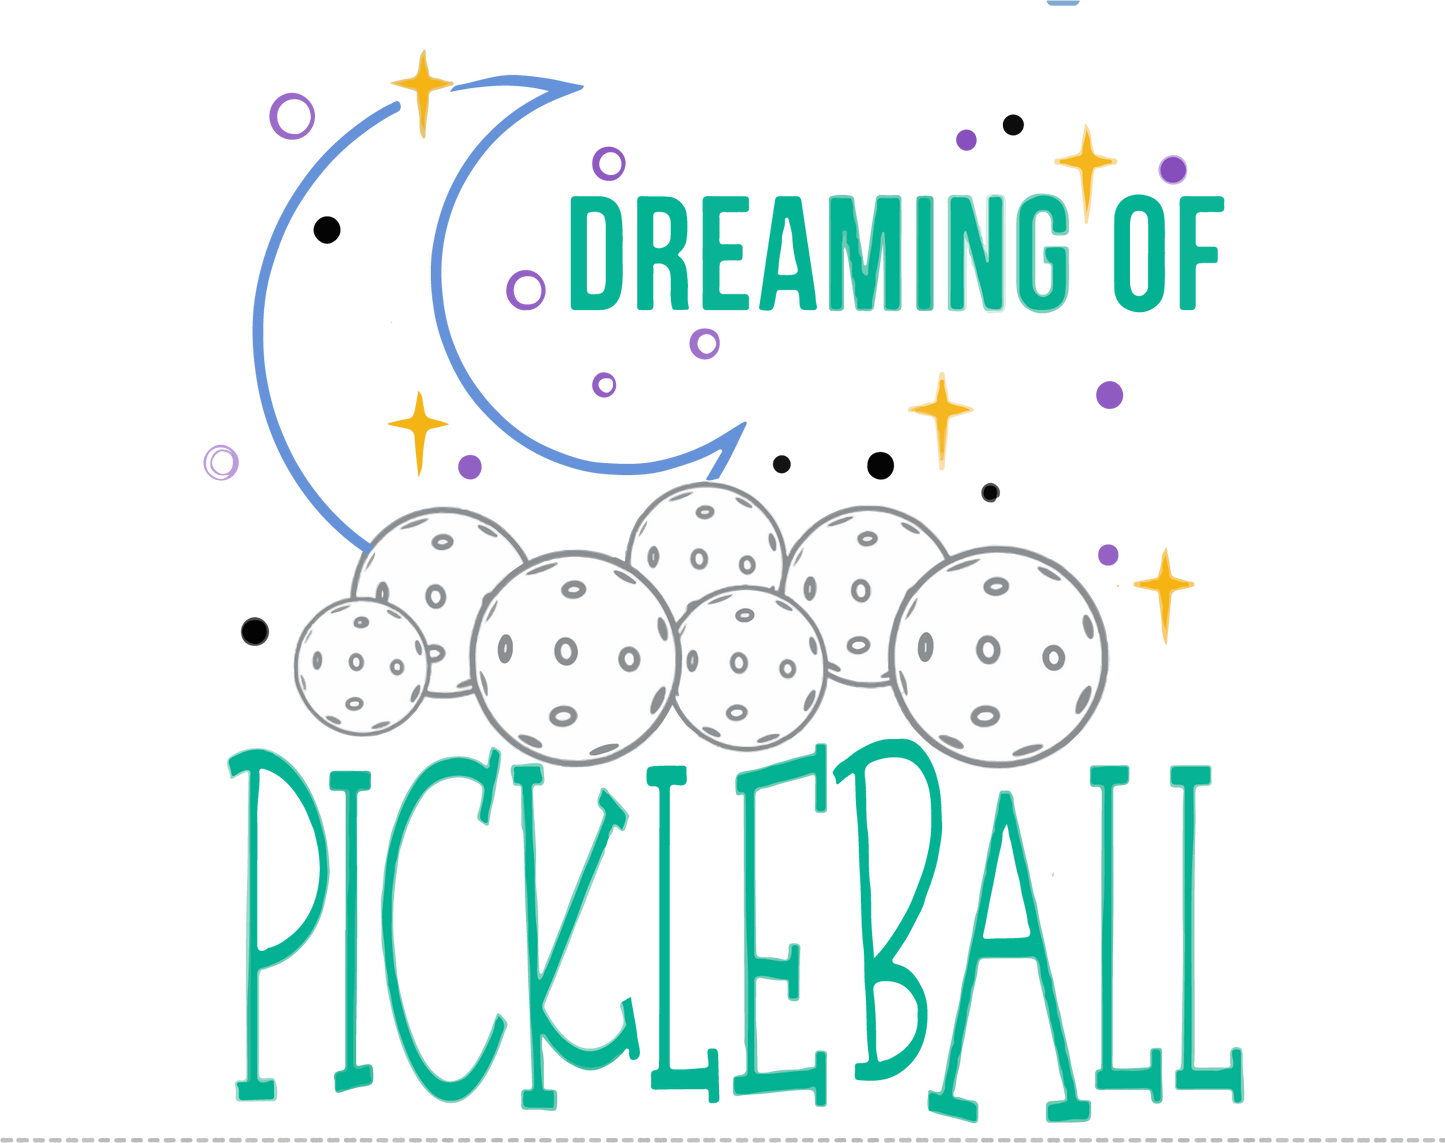 Dreaming Of Pickleball | Baby Knotted Sleeper